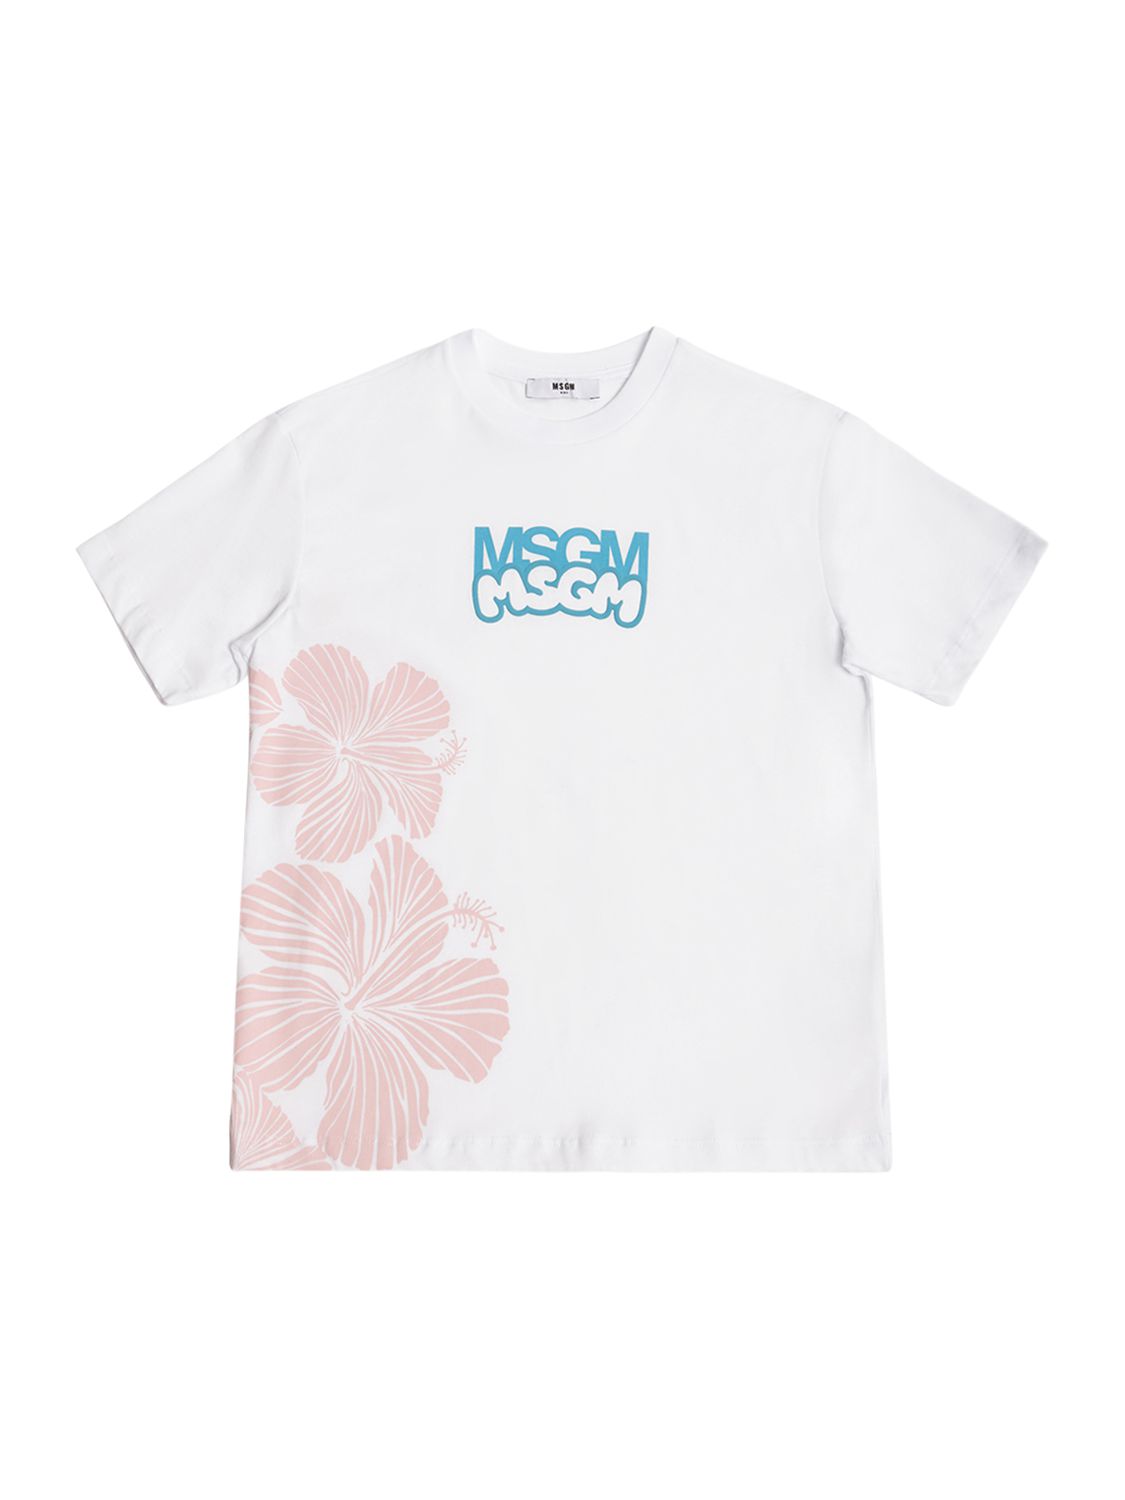 Msgm Kids' Printed Cotton Jersey T-shirt In White